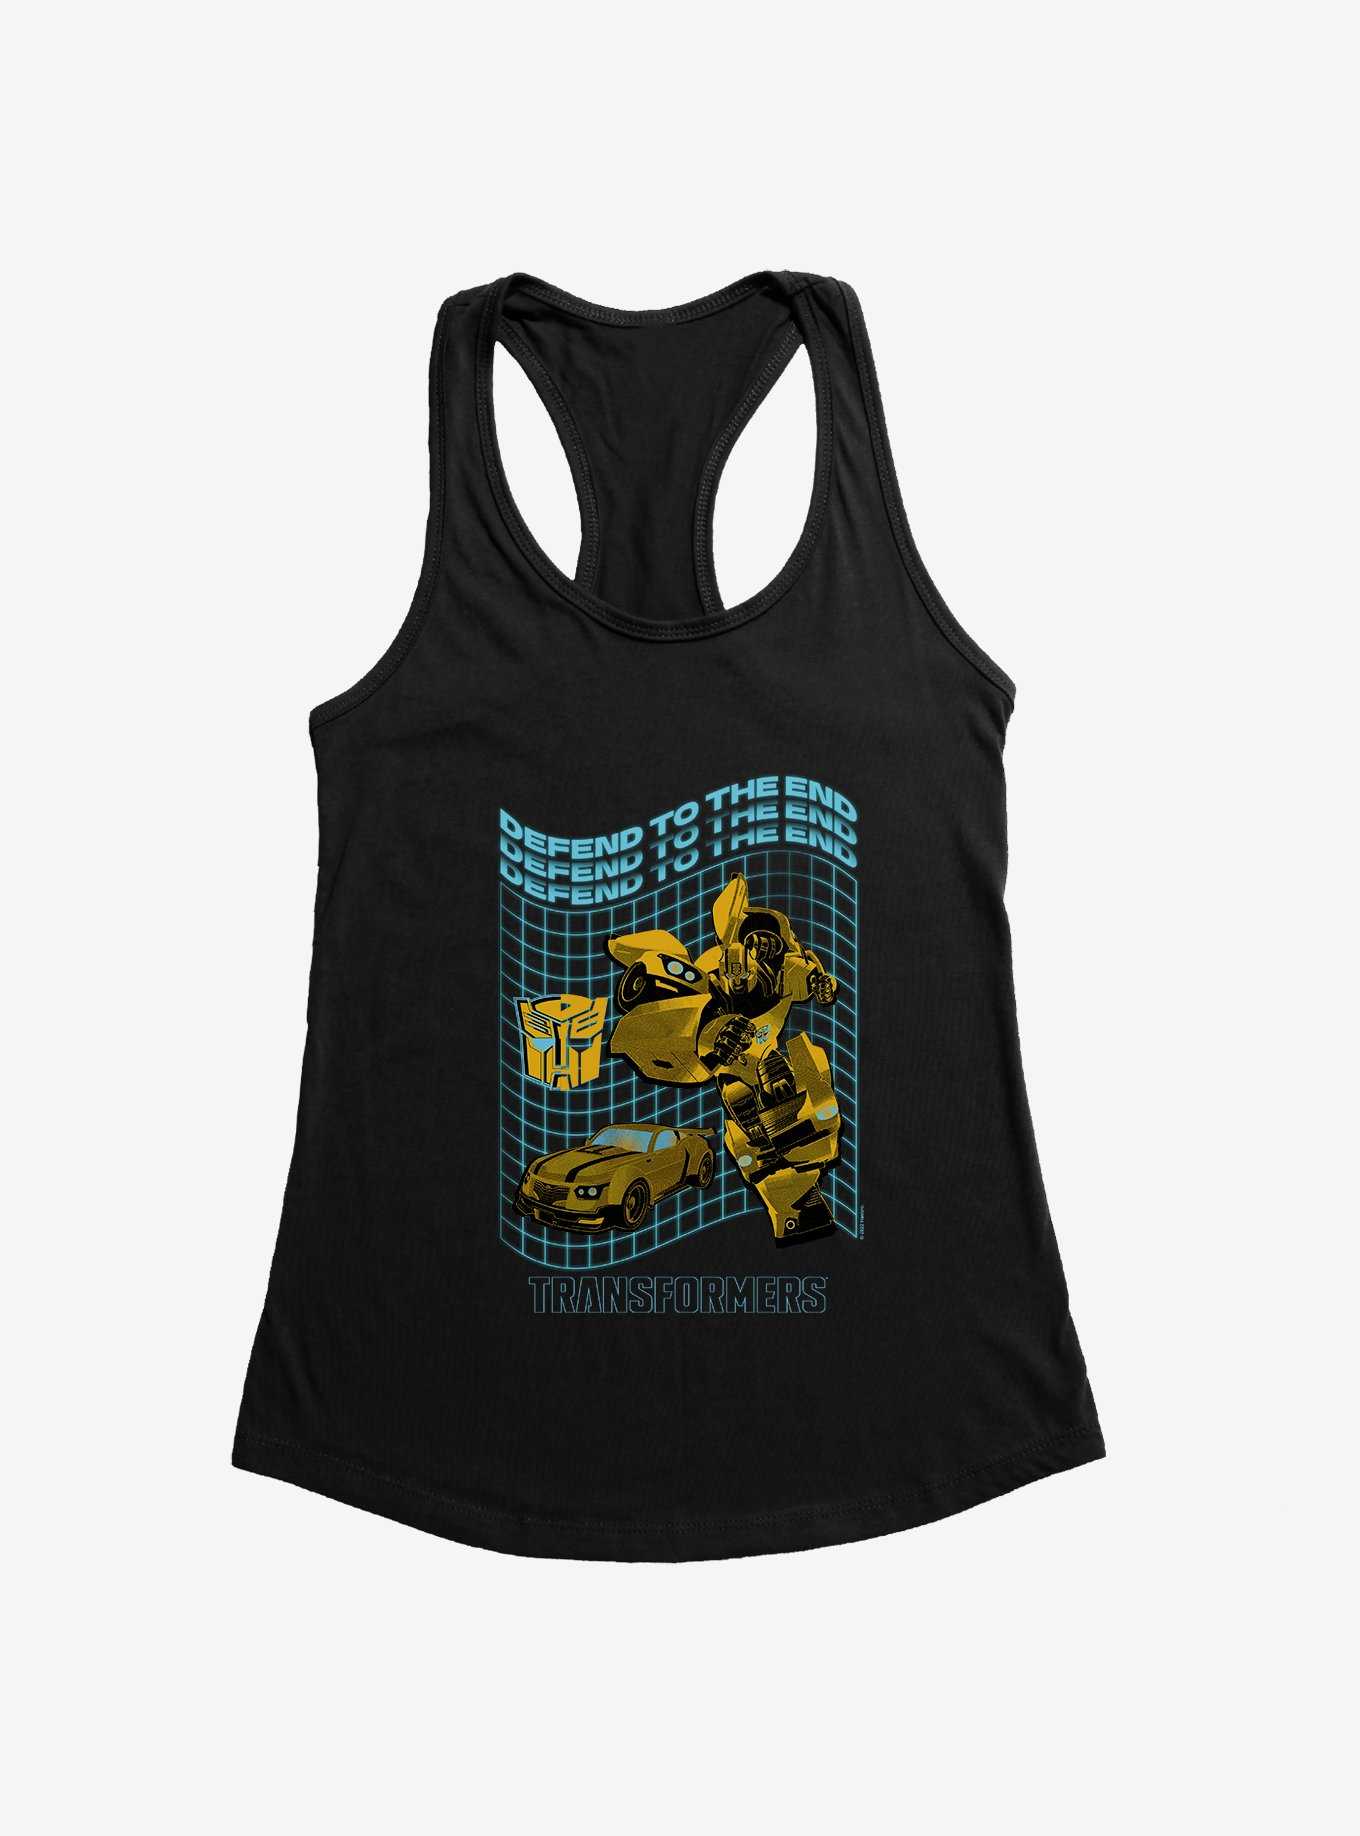 Transformers Defend To The End Bumblebee Womens Tank Top, , hi-res